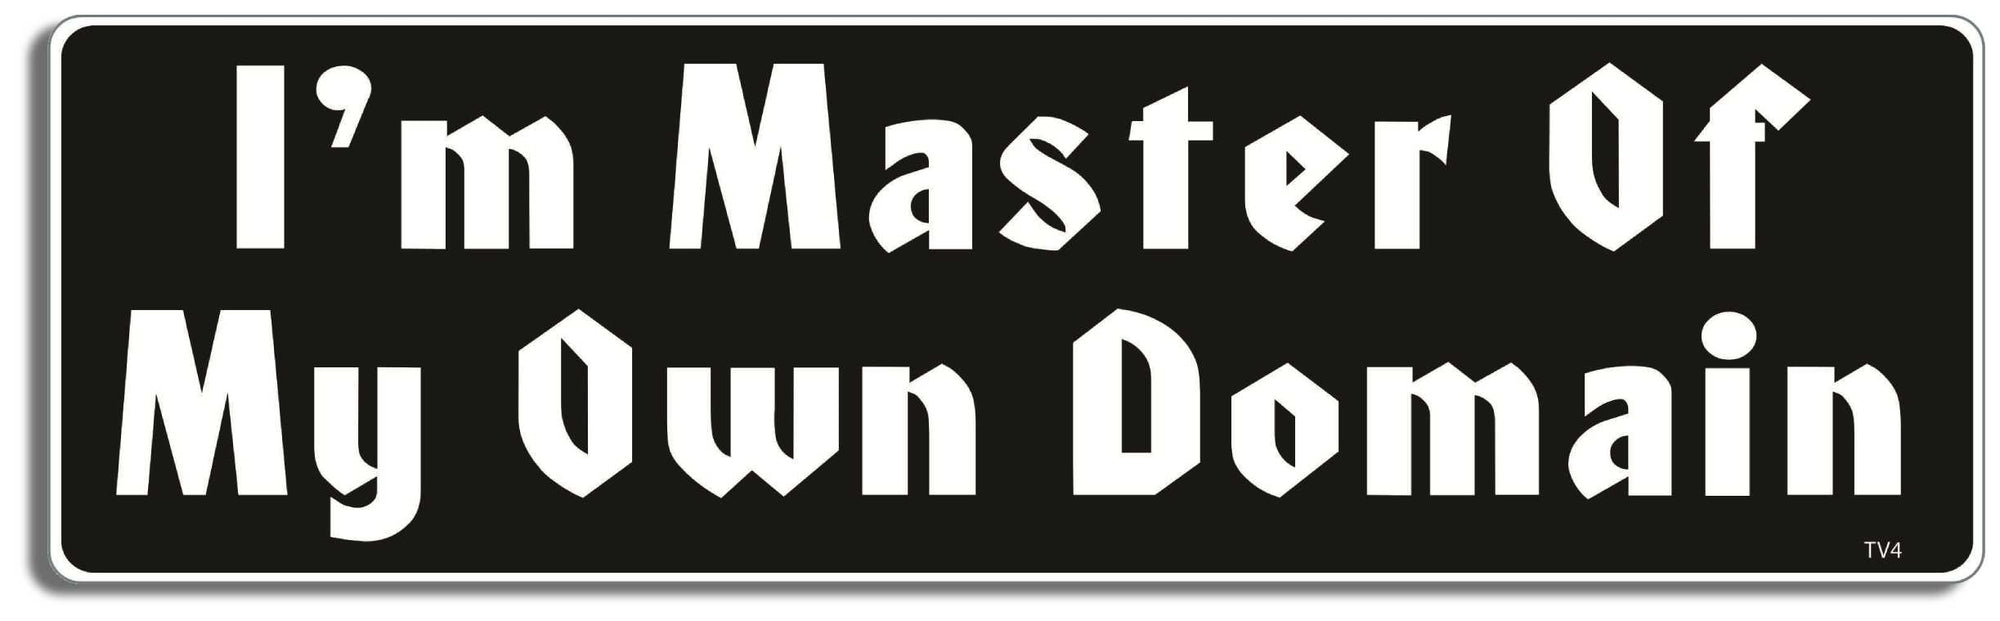 I'm Master of my own domain - 3" x 10" Bumper Sticker--Car Magnet- -  Decal Bumper Sticker-seinfeld Bumper Sticker Car Magnet I'm Master of my own domain-  Decal for carsseinfeld